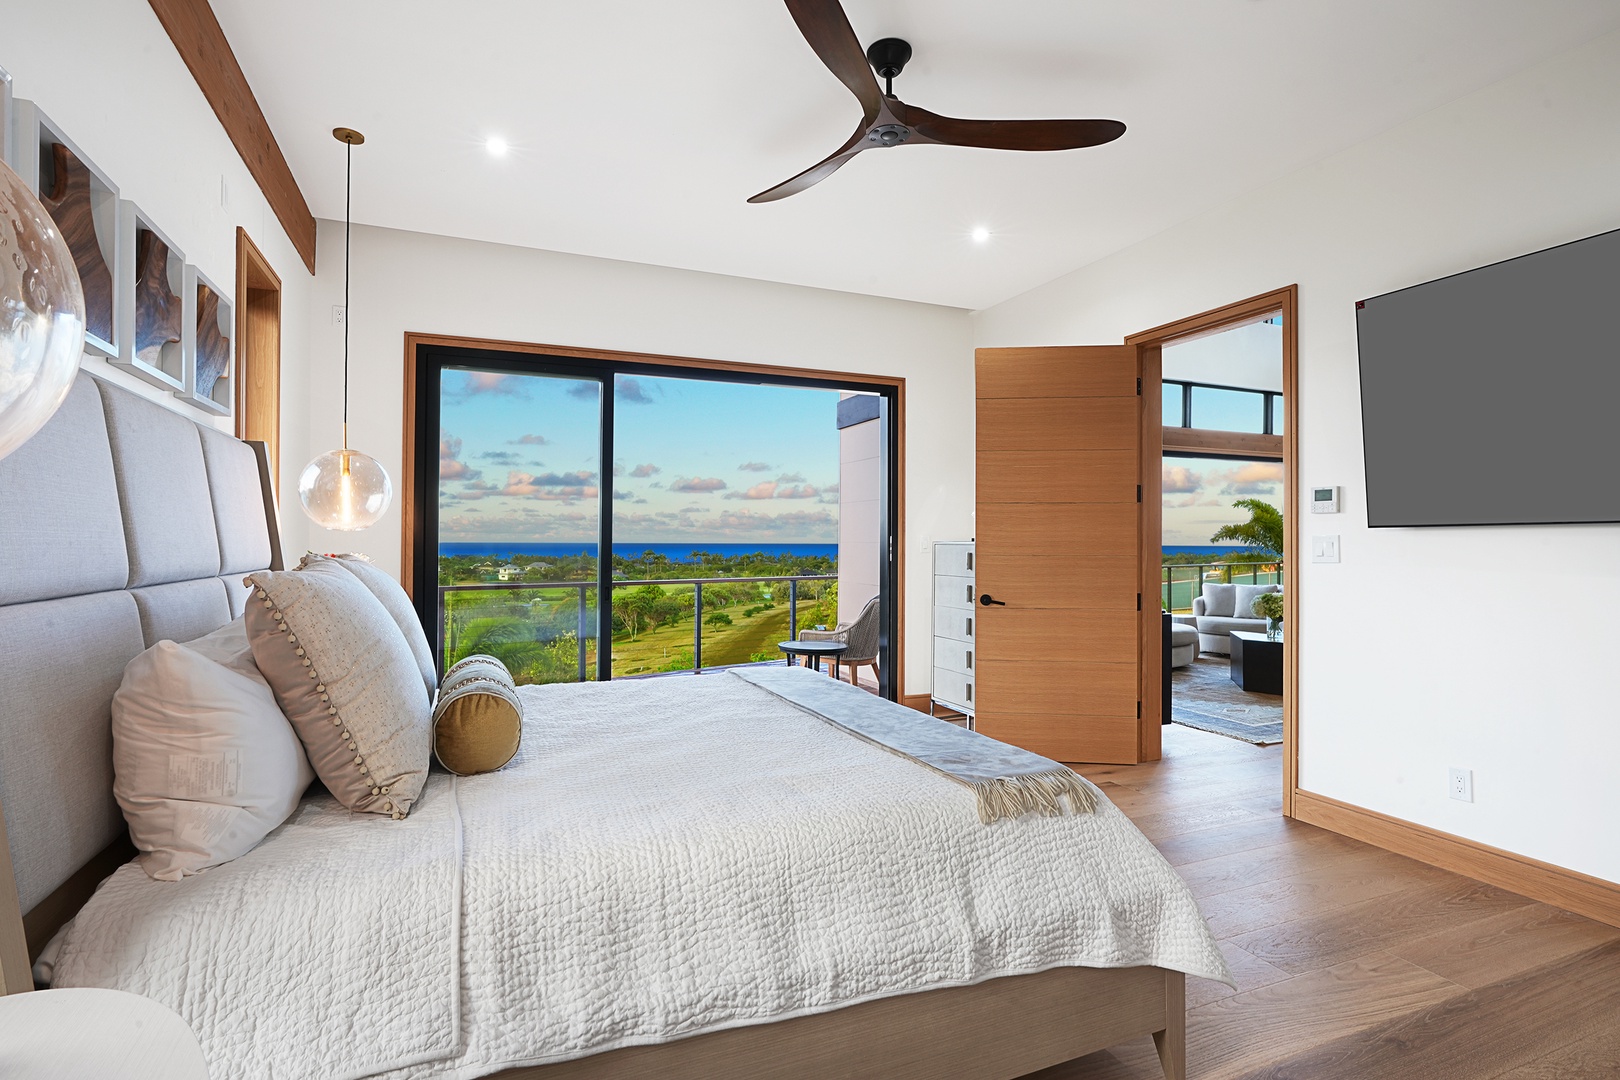 Koloa Vacation Rentals, Hale Keaka at Kukui'ula - Awaken in this serene primary suite where comfort meets elegance, offering sweeping views that promise a new perspective with every sunrise.